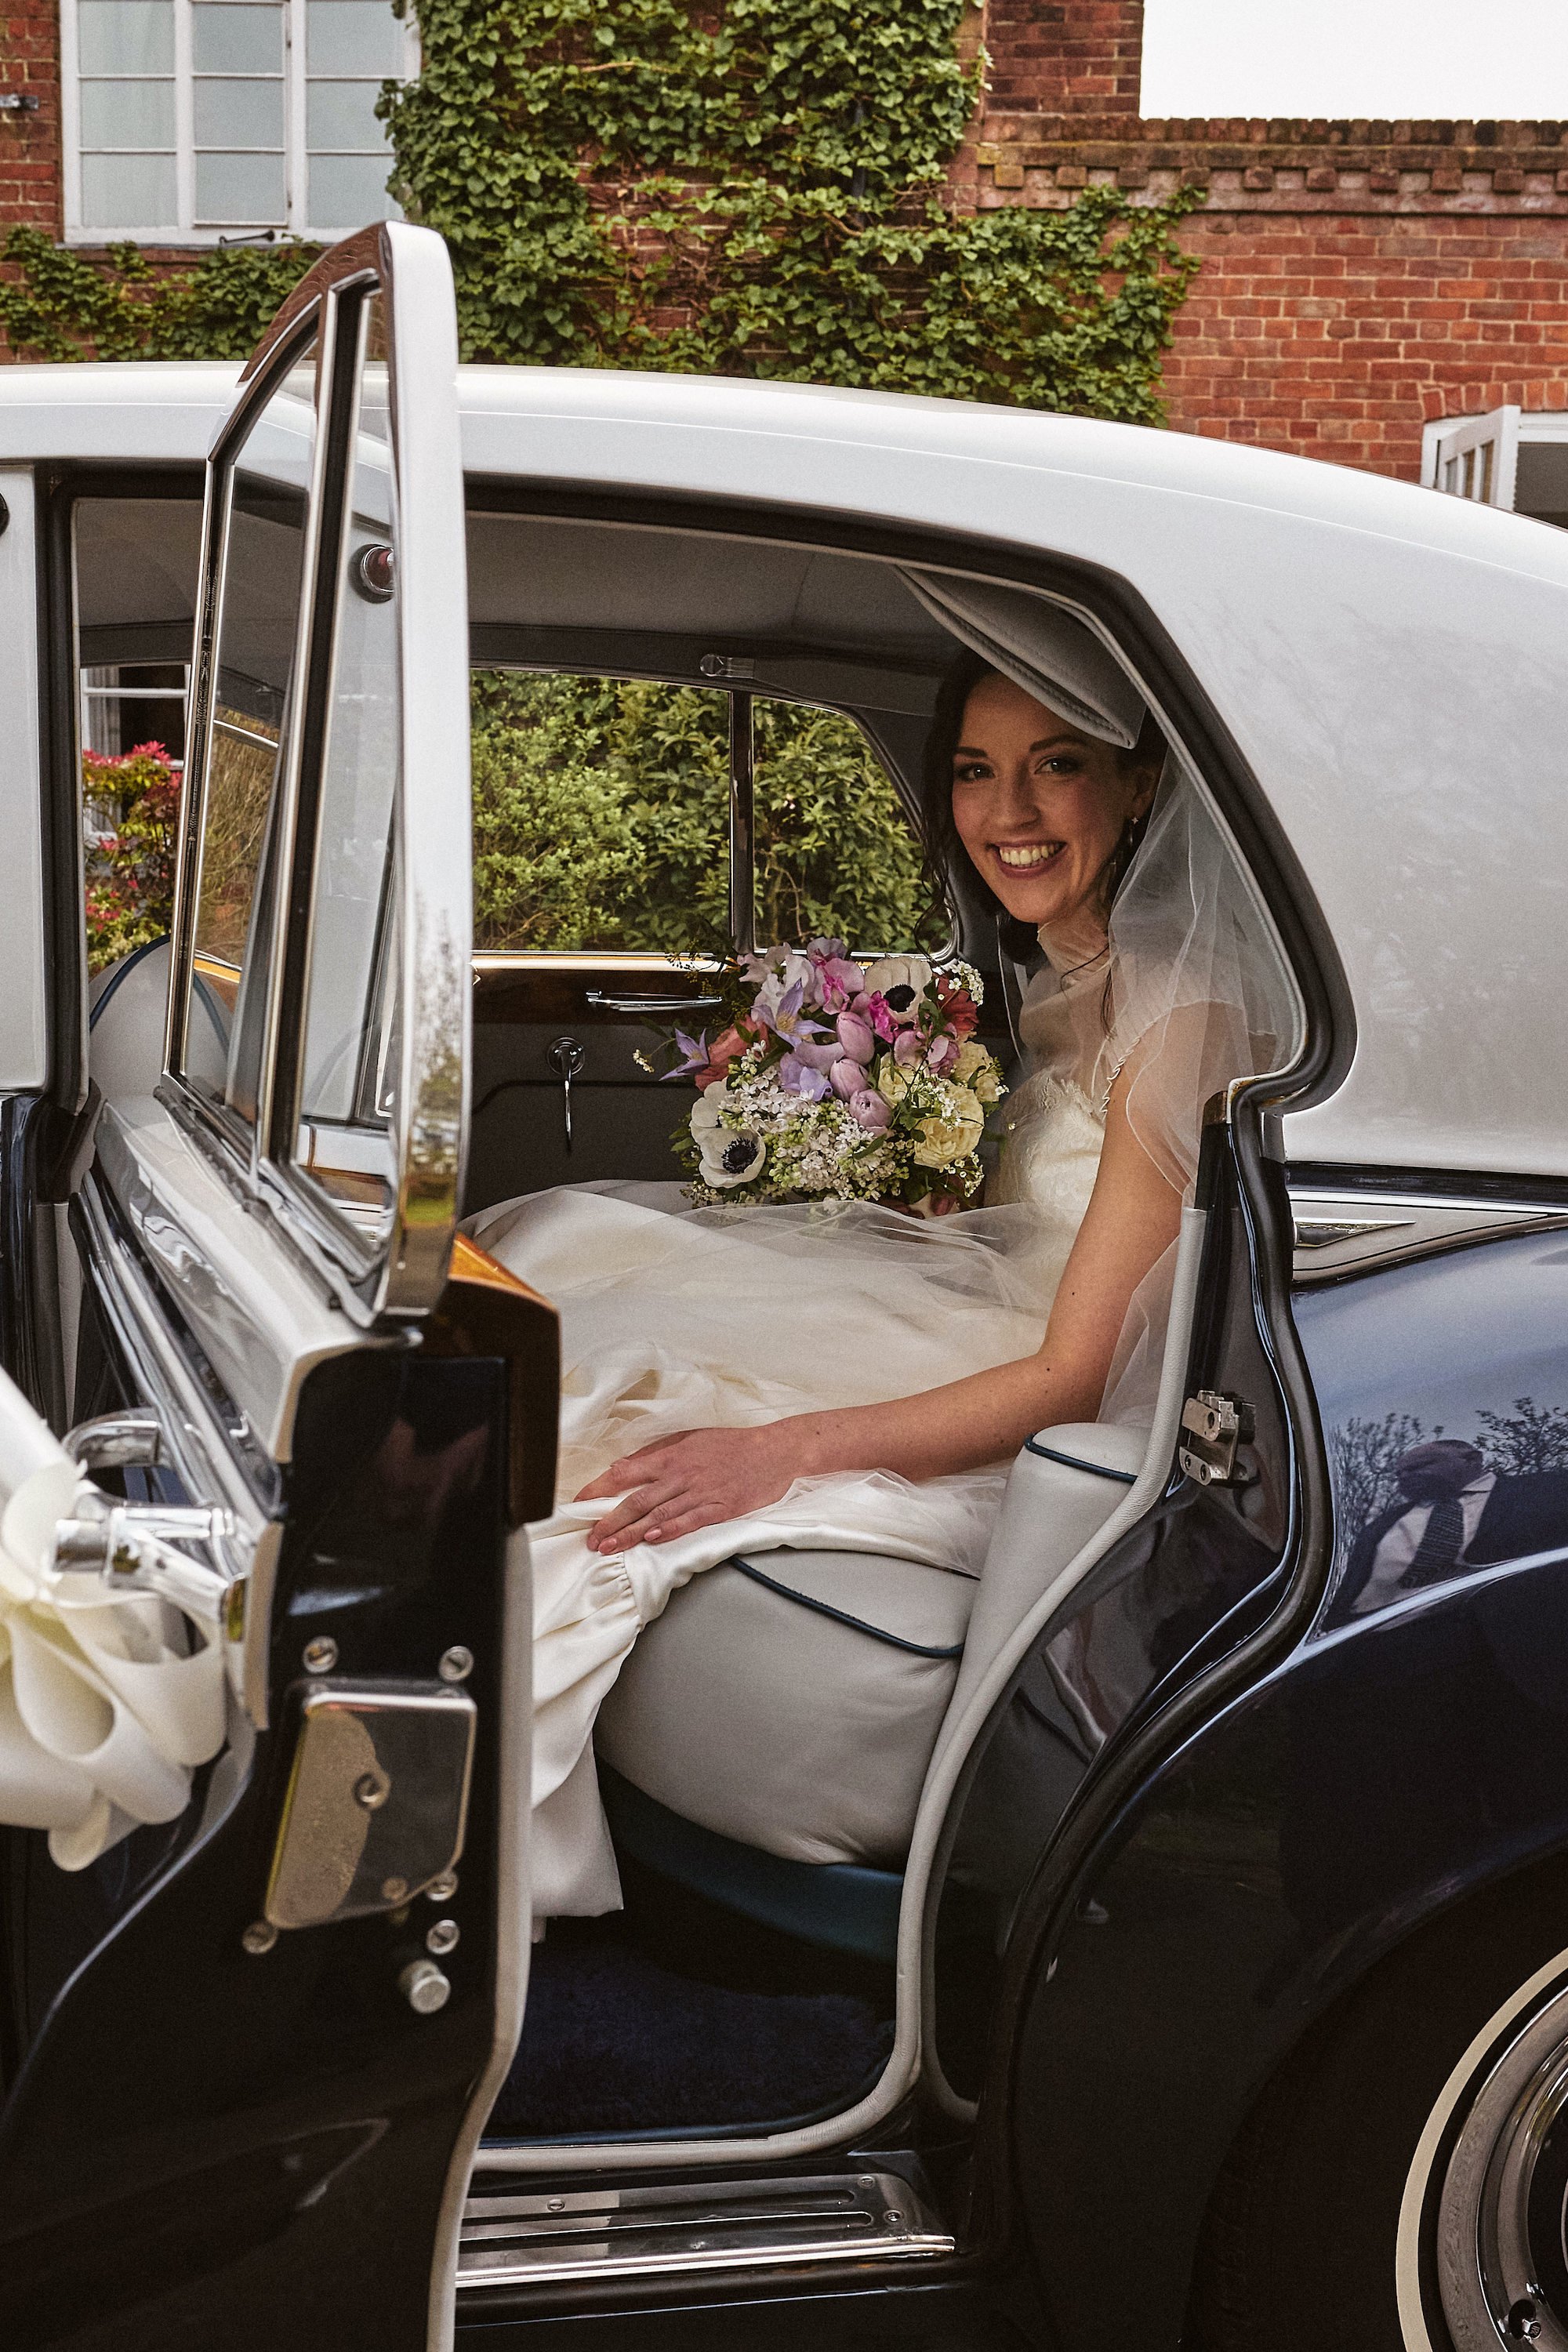 Beautiful bride Becky wore the Breeze wedding dress, Wren Top and Issa shrug for her wedding day | Halfpenny London bride